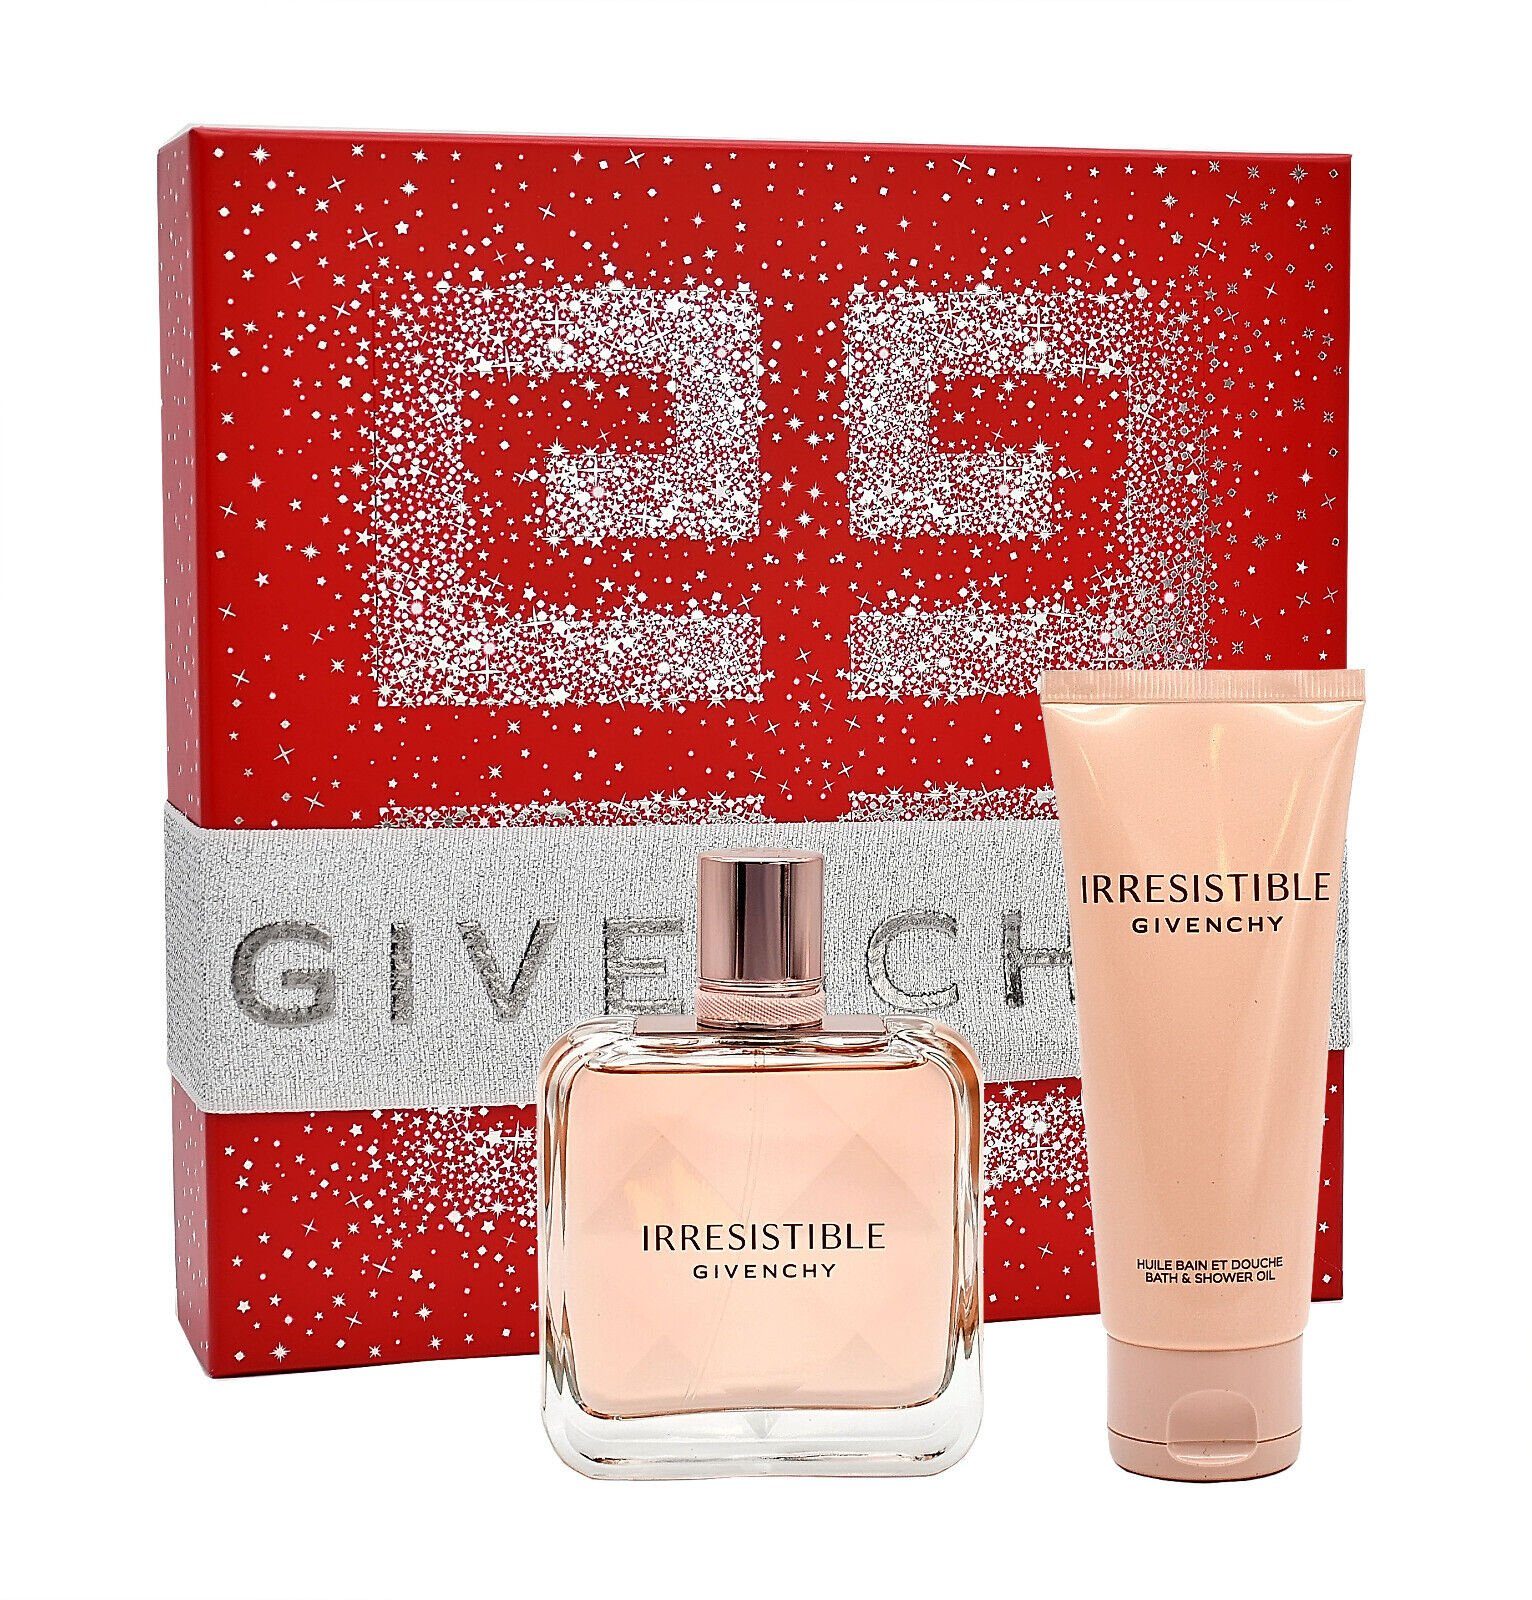 75ML +BODY + GEL GIVENCHY 75ML GIVENCHY Duft-Set SHOWER 80ML LOTION EDP IRRESISTIBLE